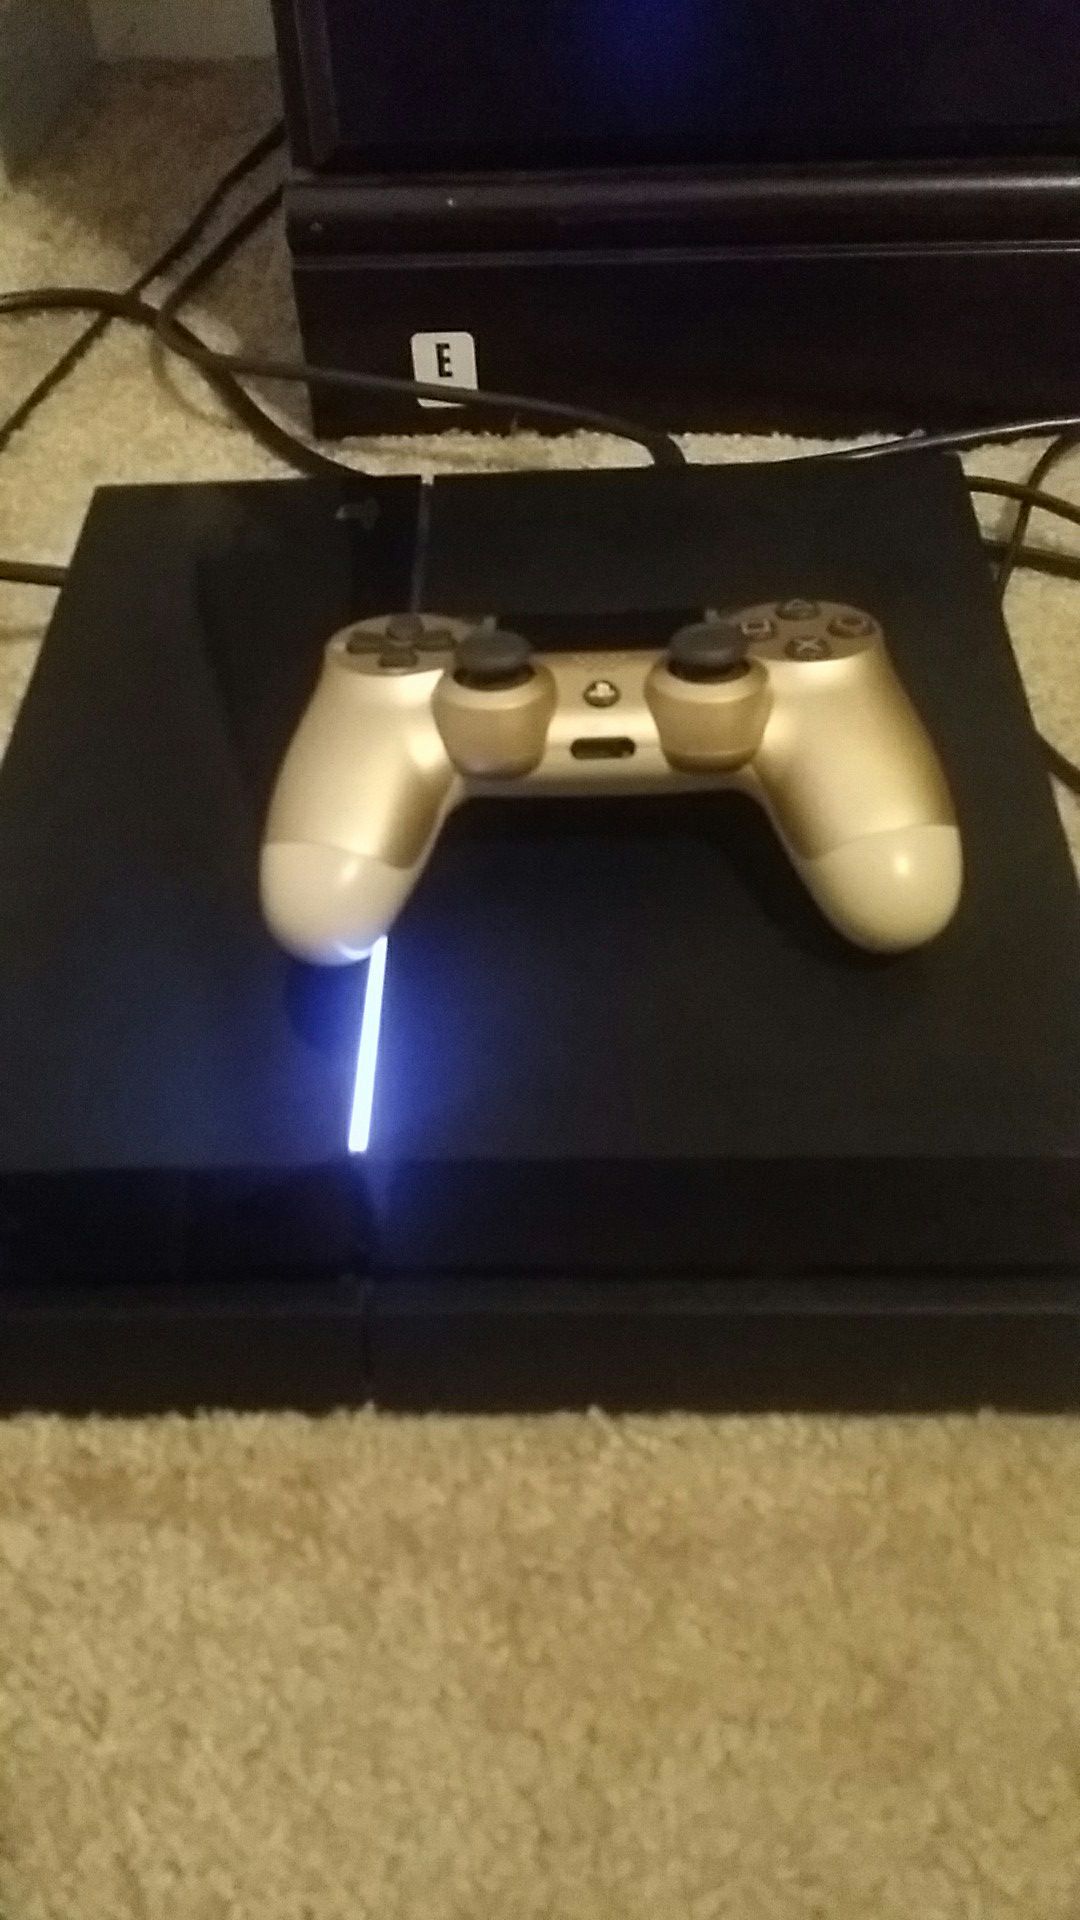 Ps4 with hundreds of dollars worth of games and items